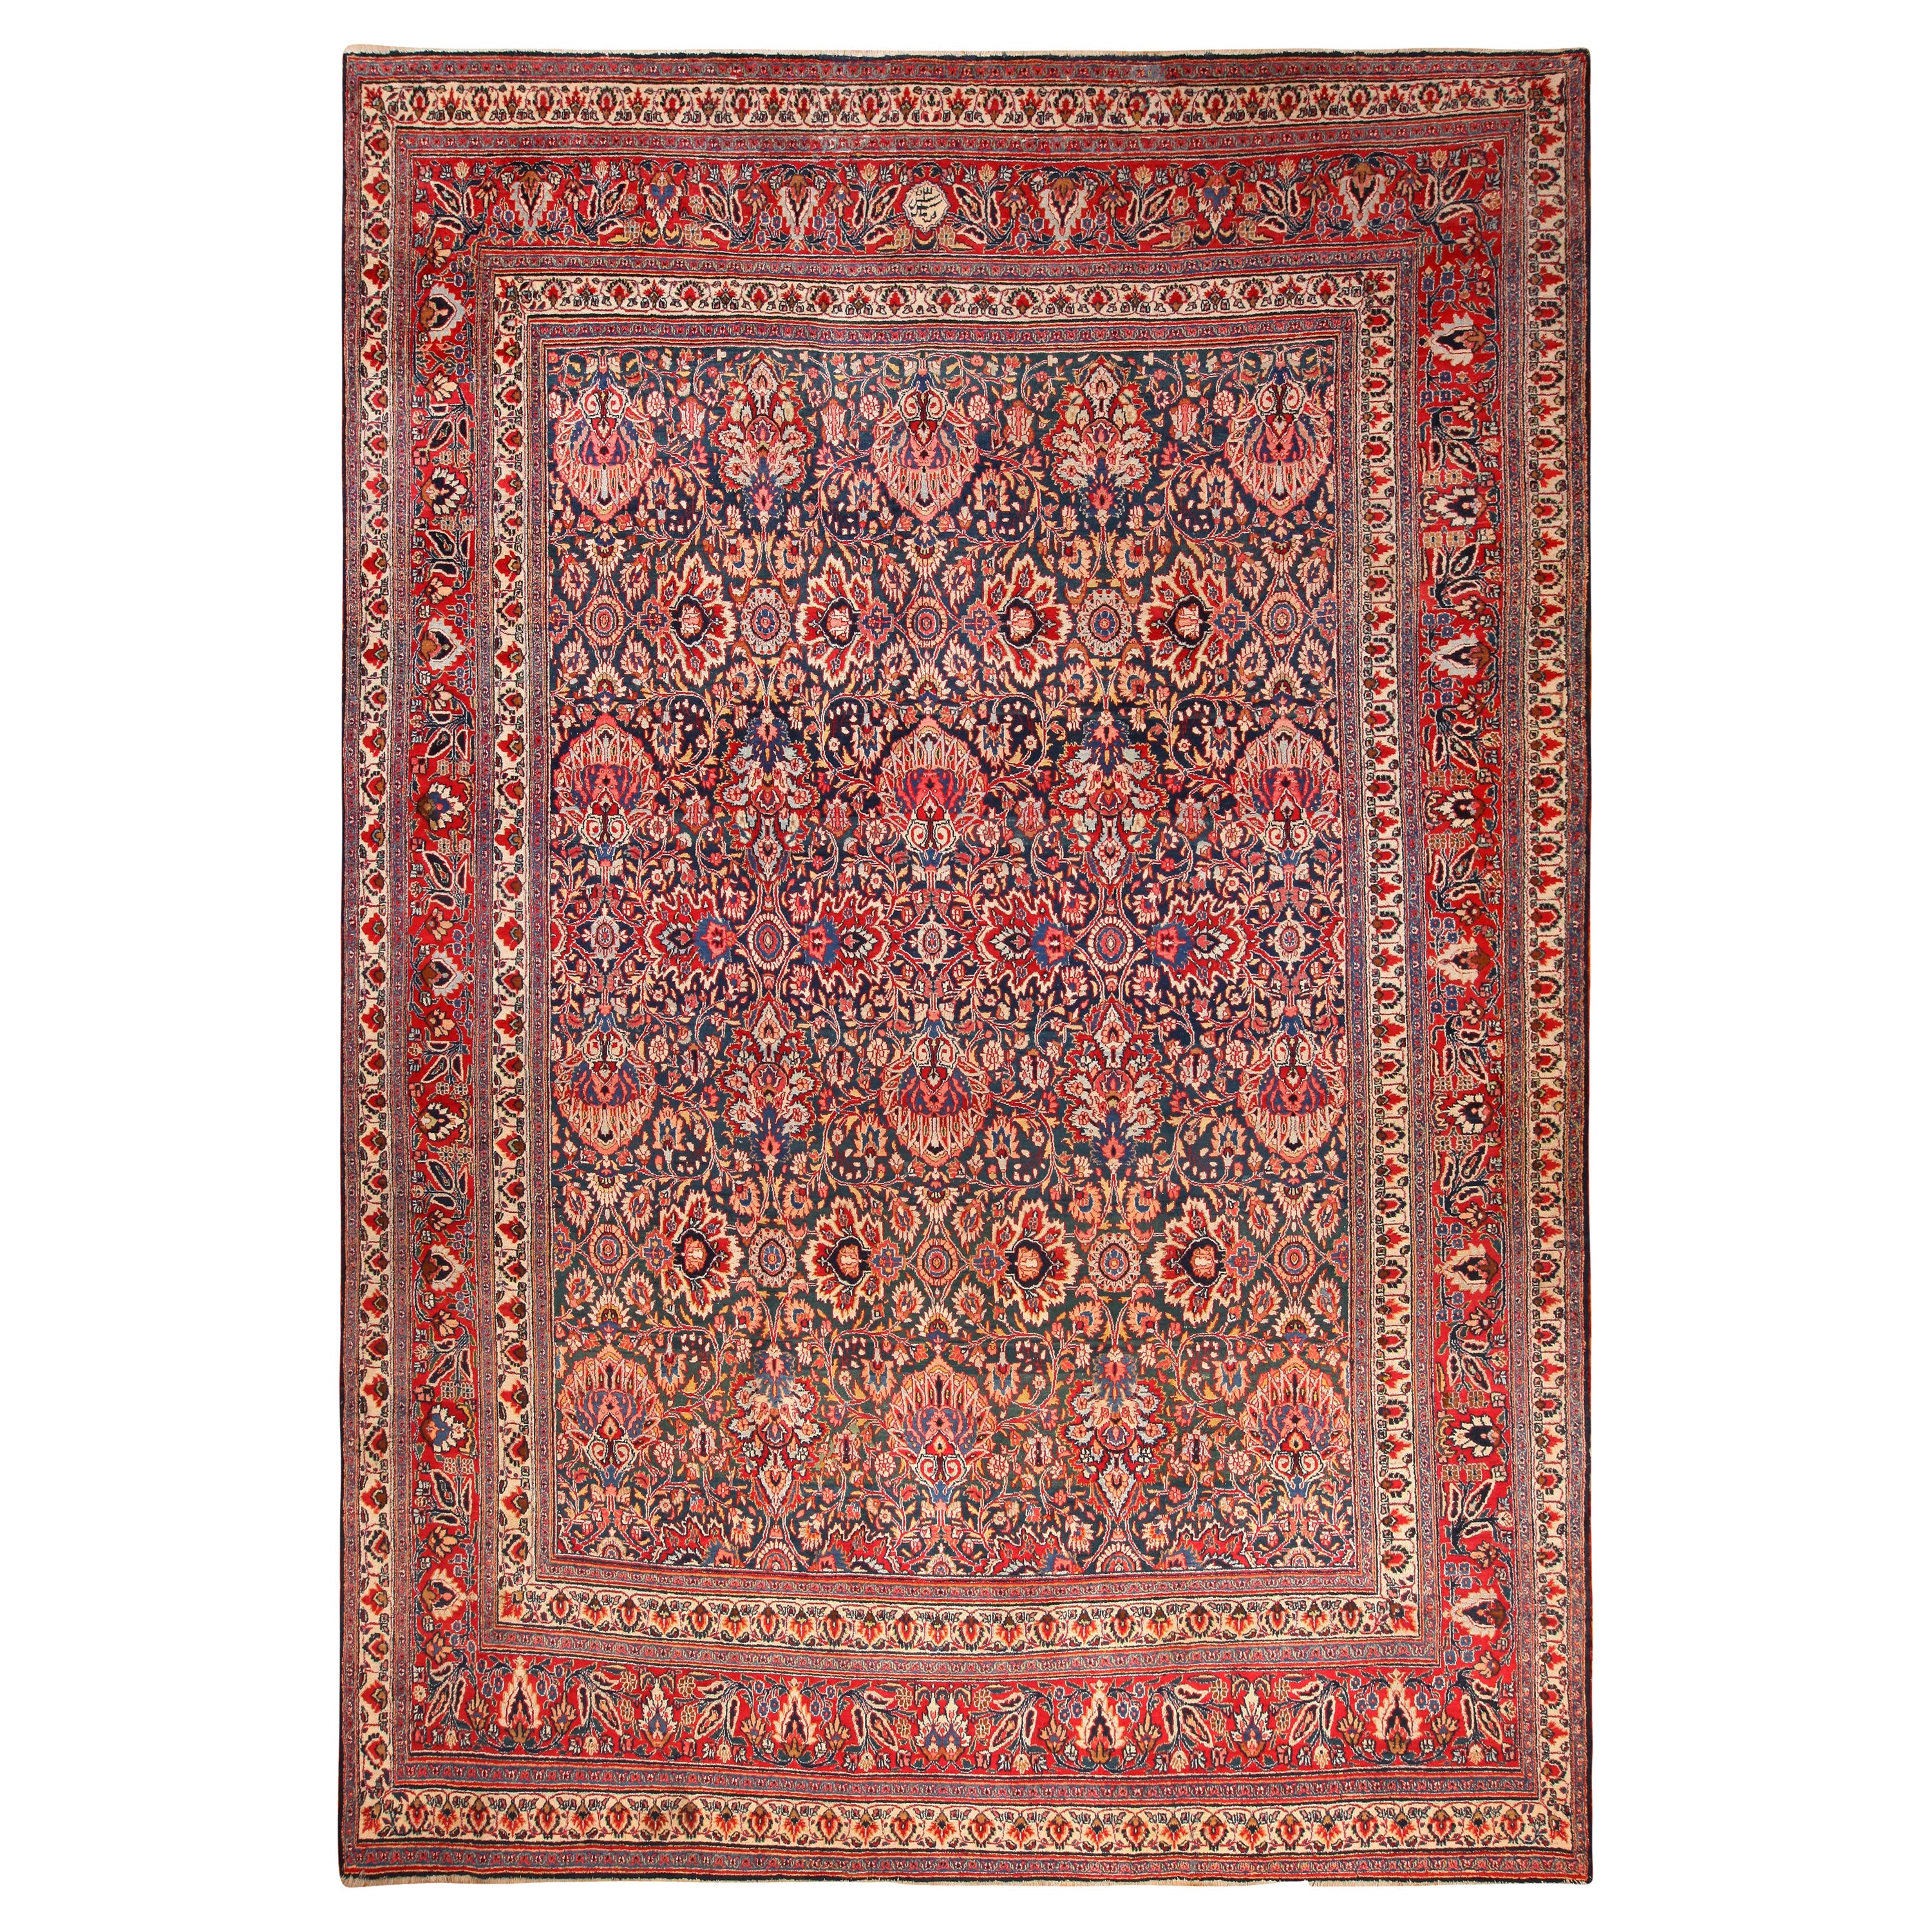 Large Antique Persian Khorassan Rug. 11 ft 10 in x 17 ft For Sale